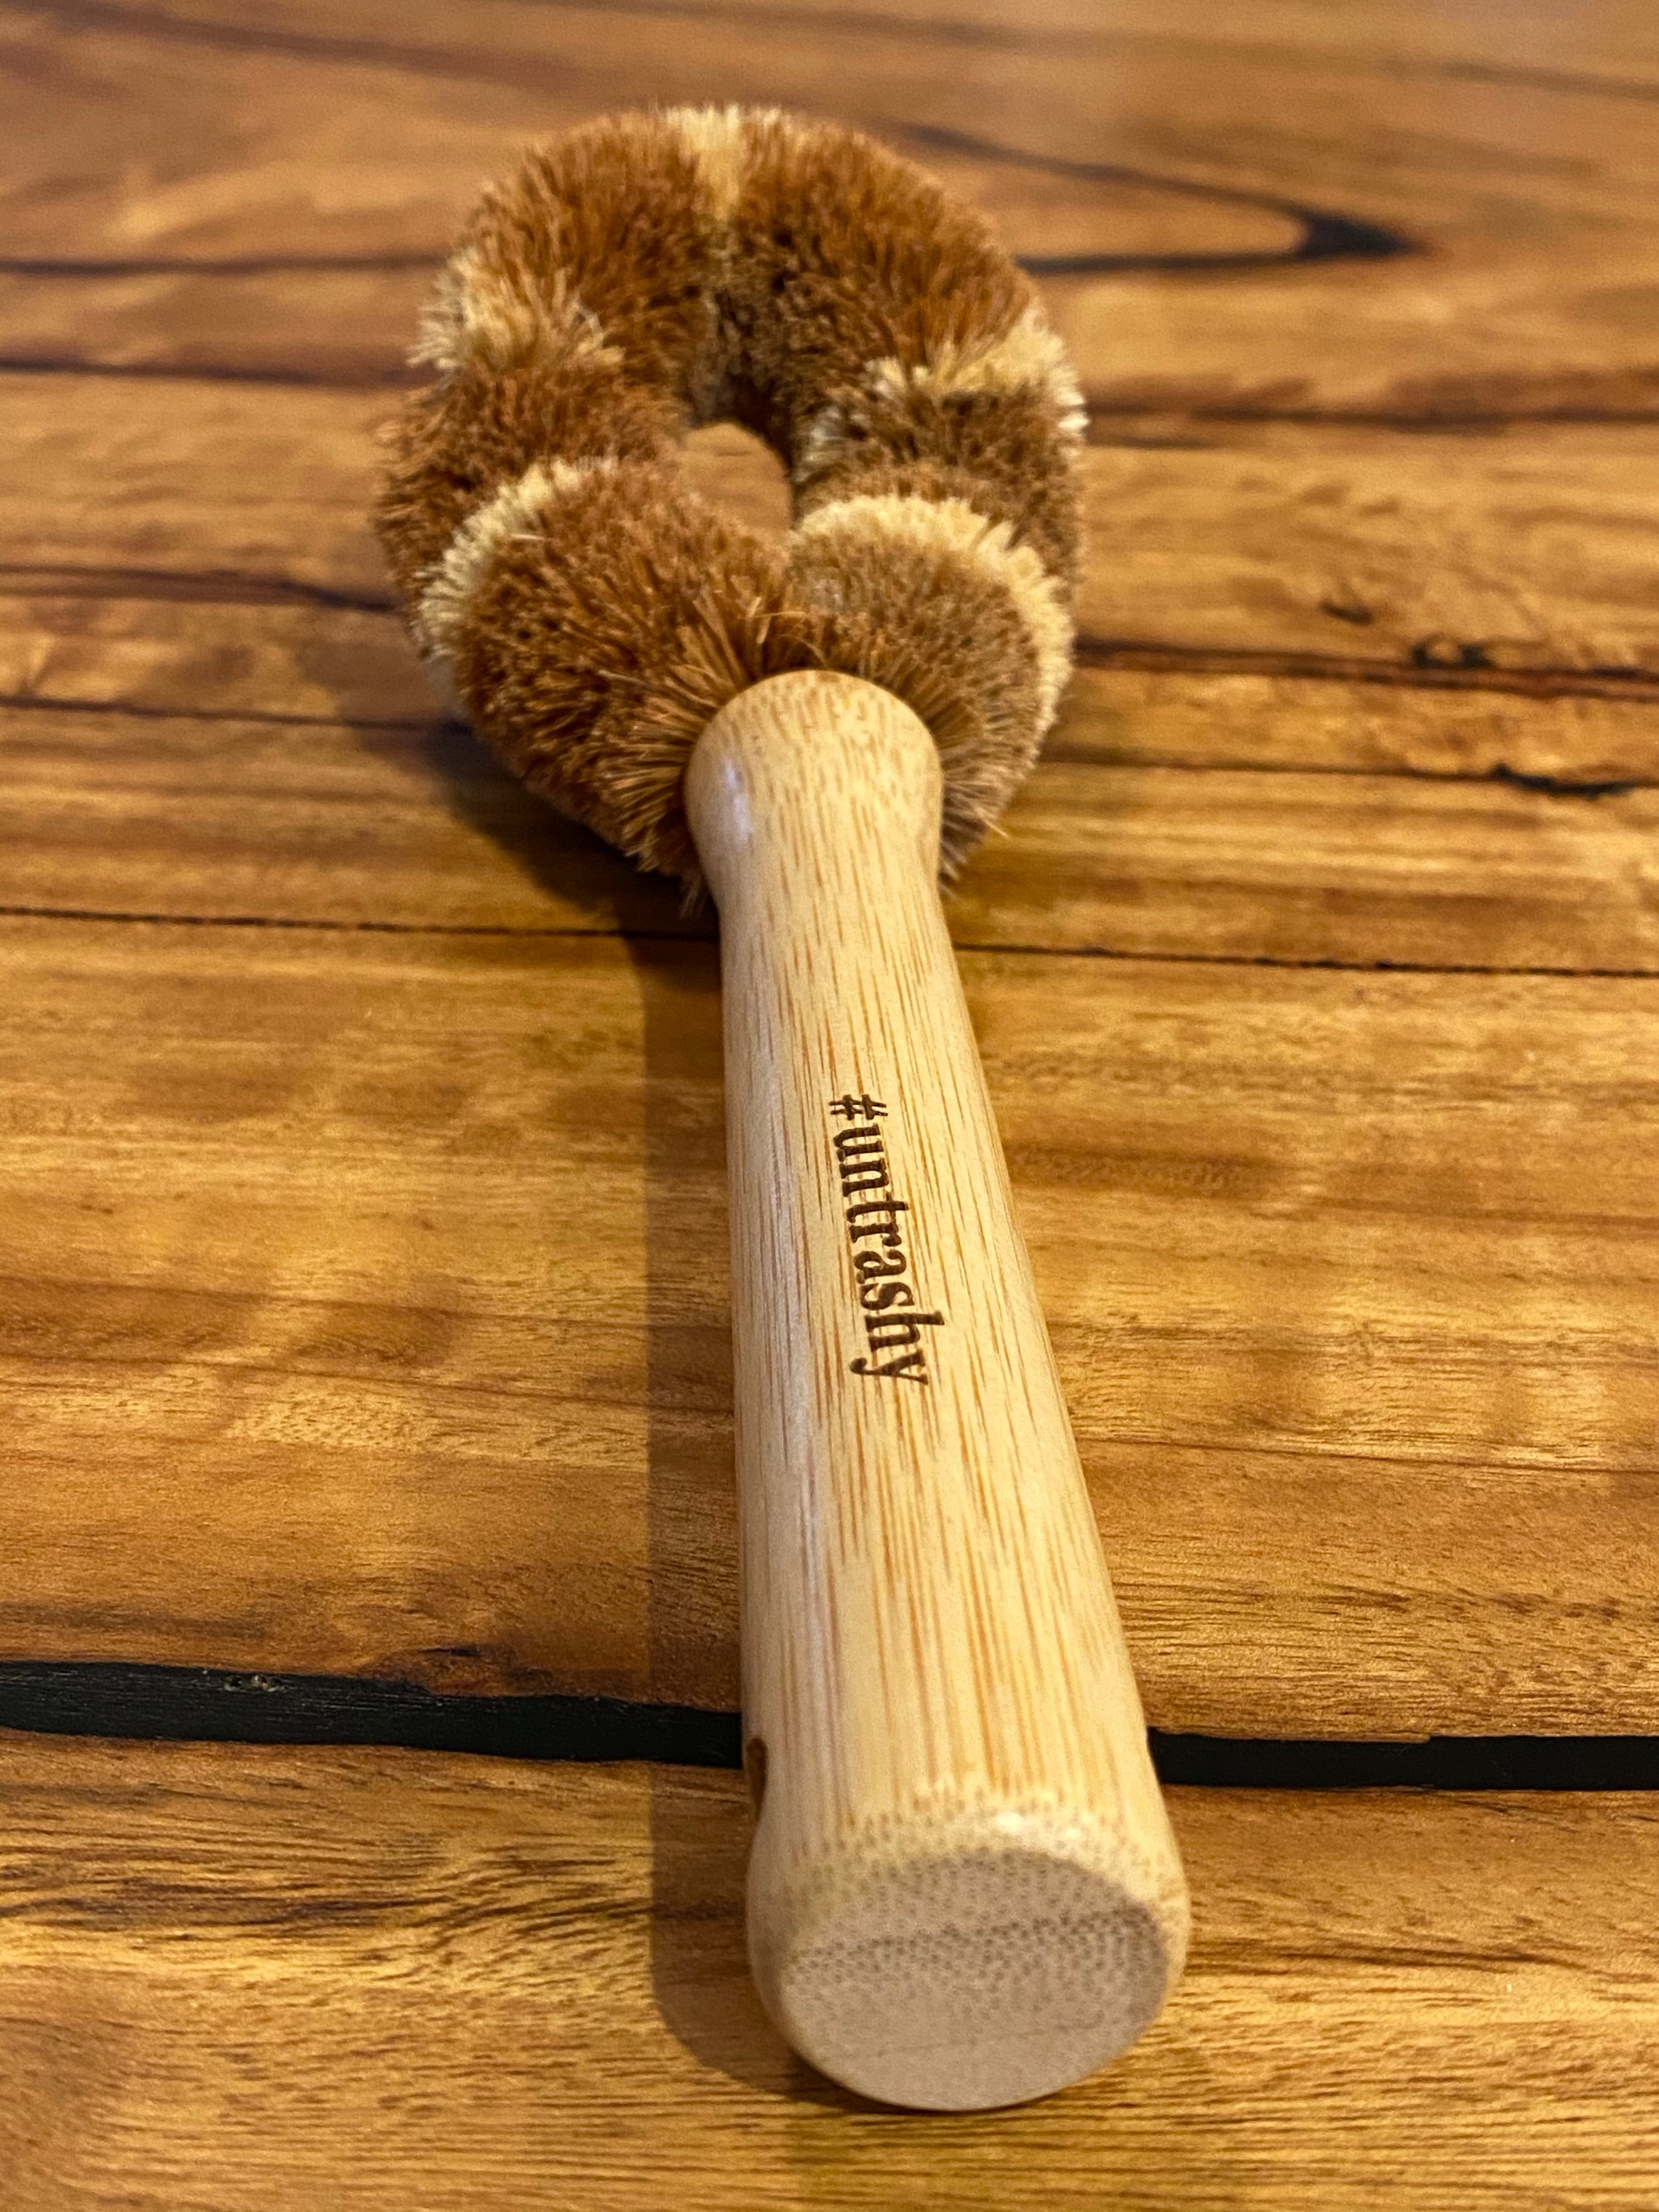 #untrashy branded dish brush on wooden table